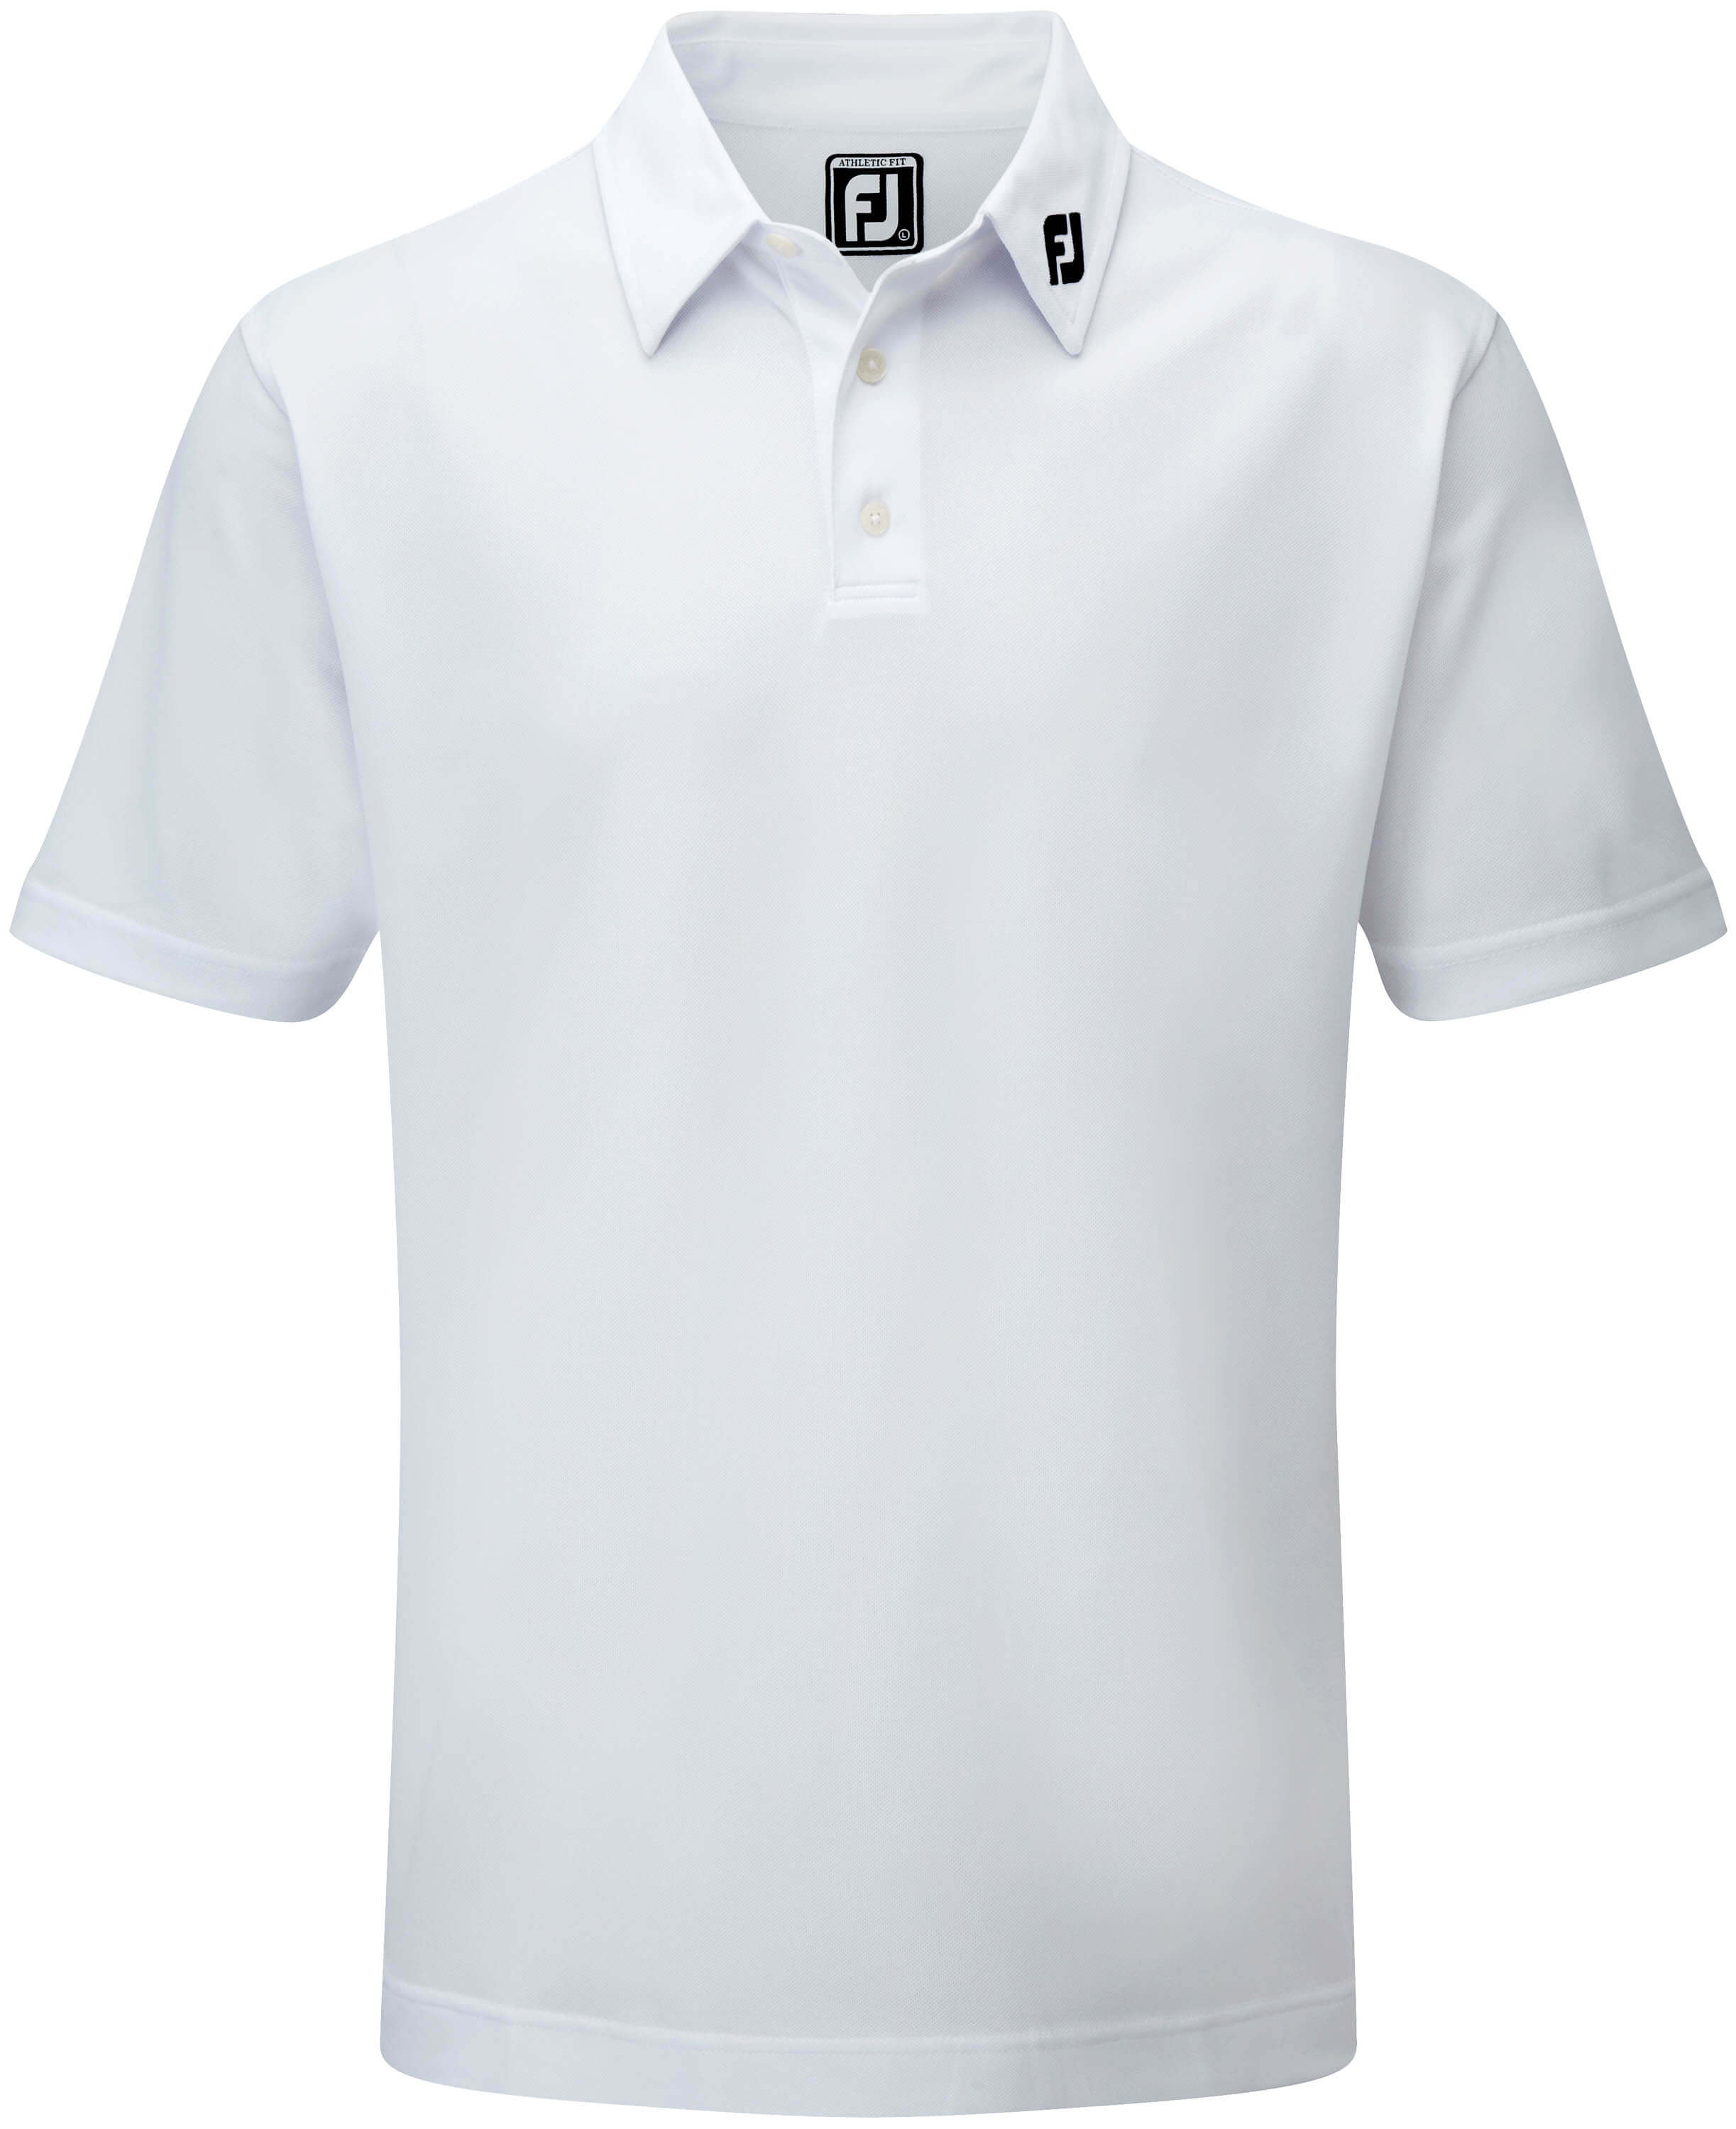 FootJoy Stretch Pique Solid Polo, white